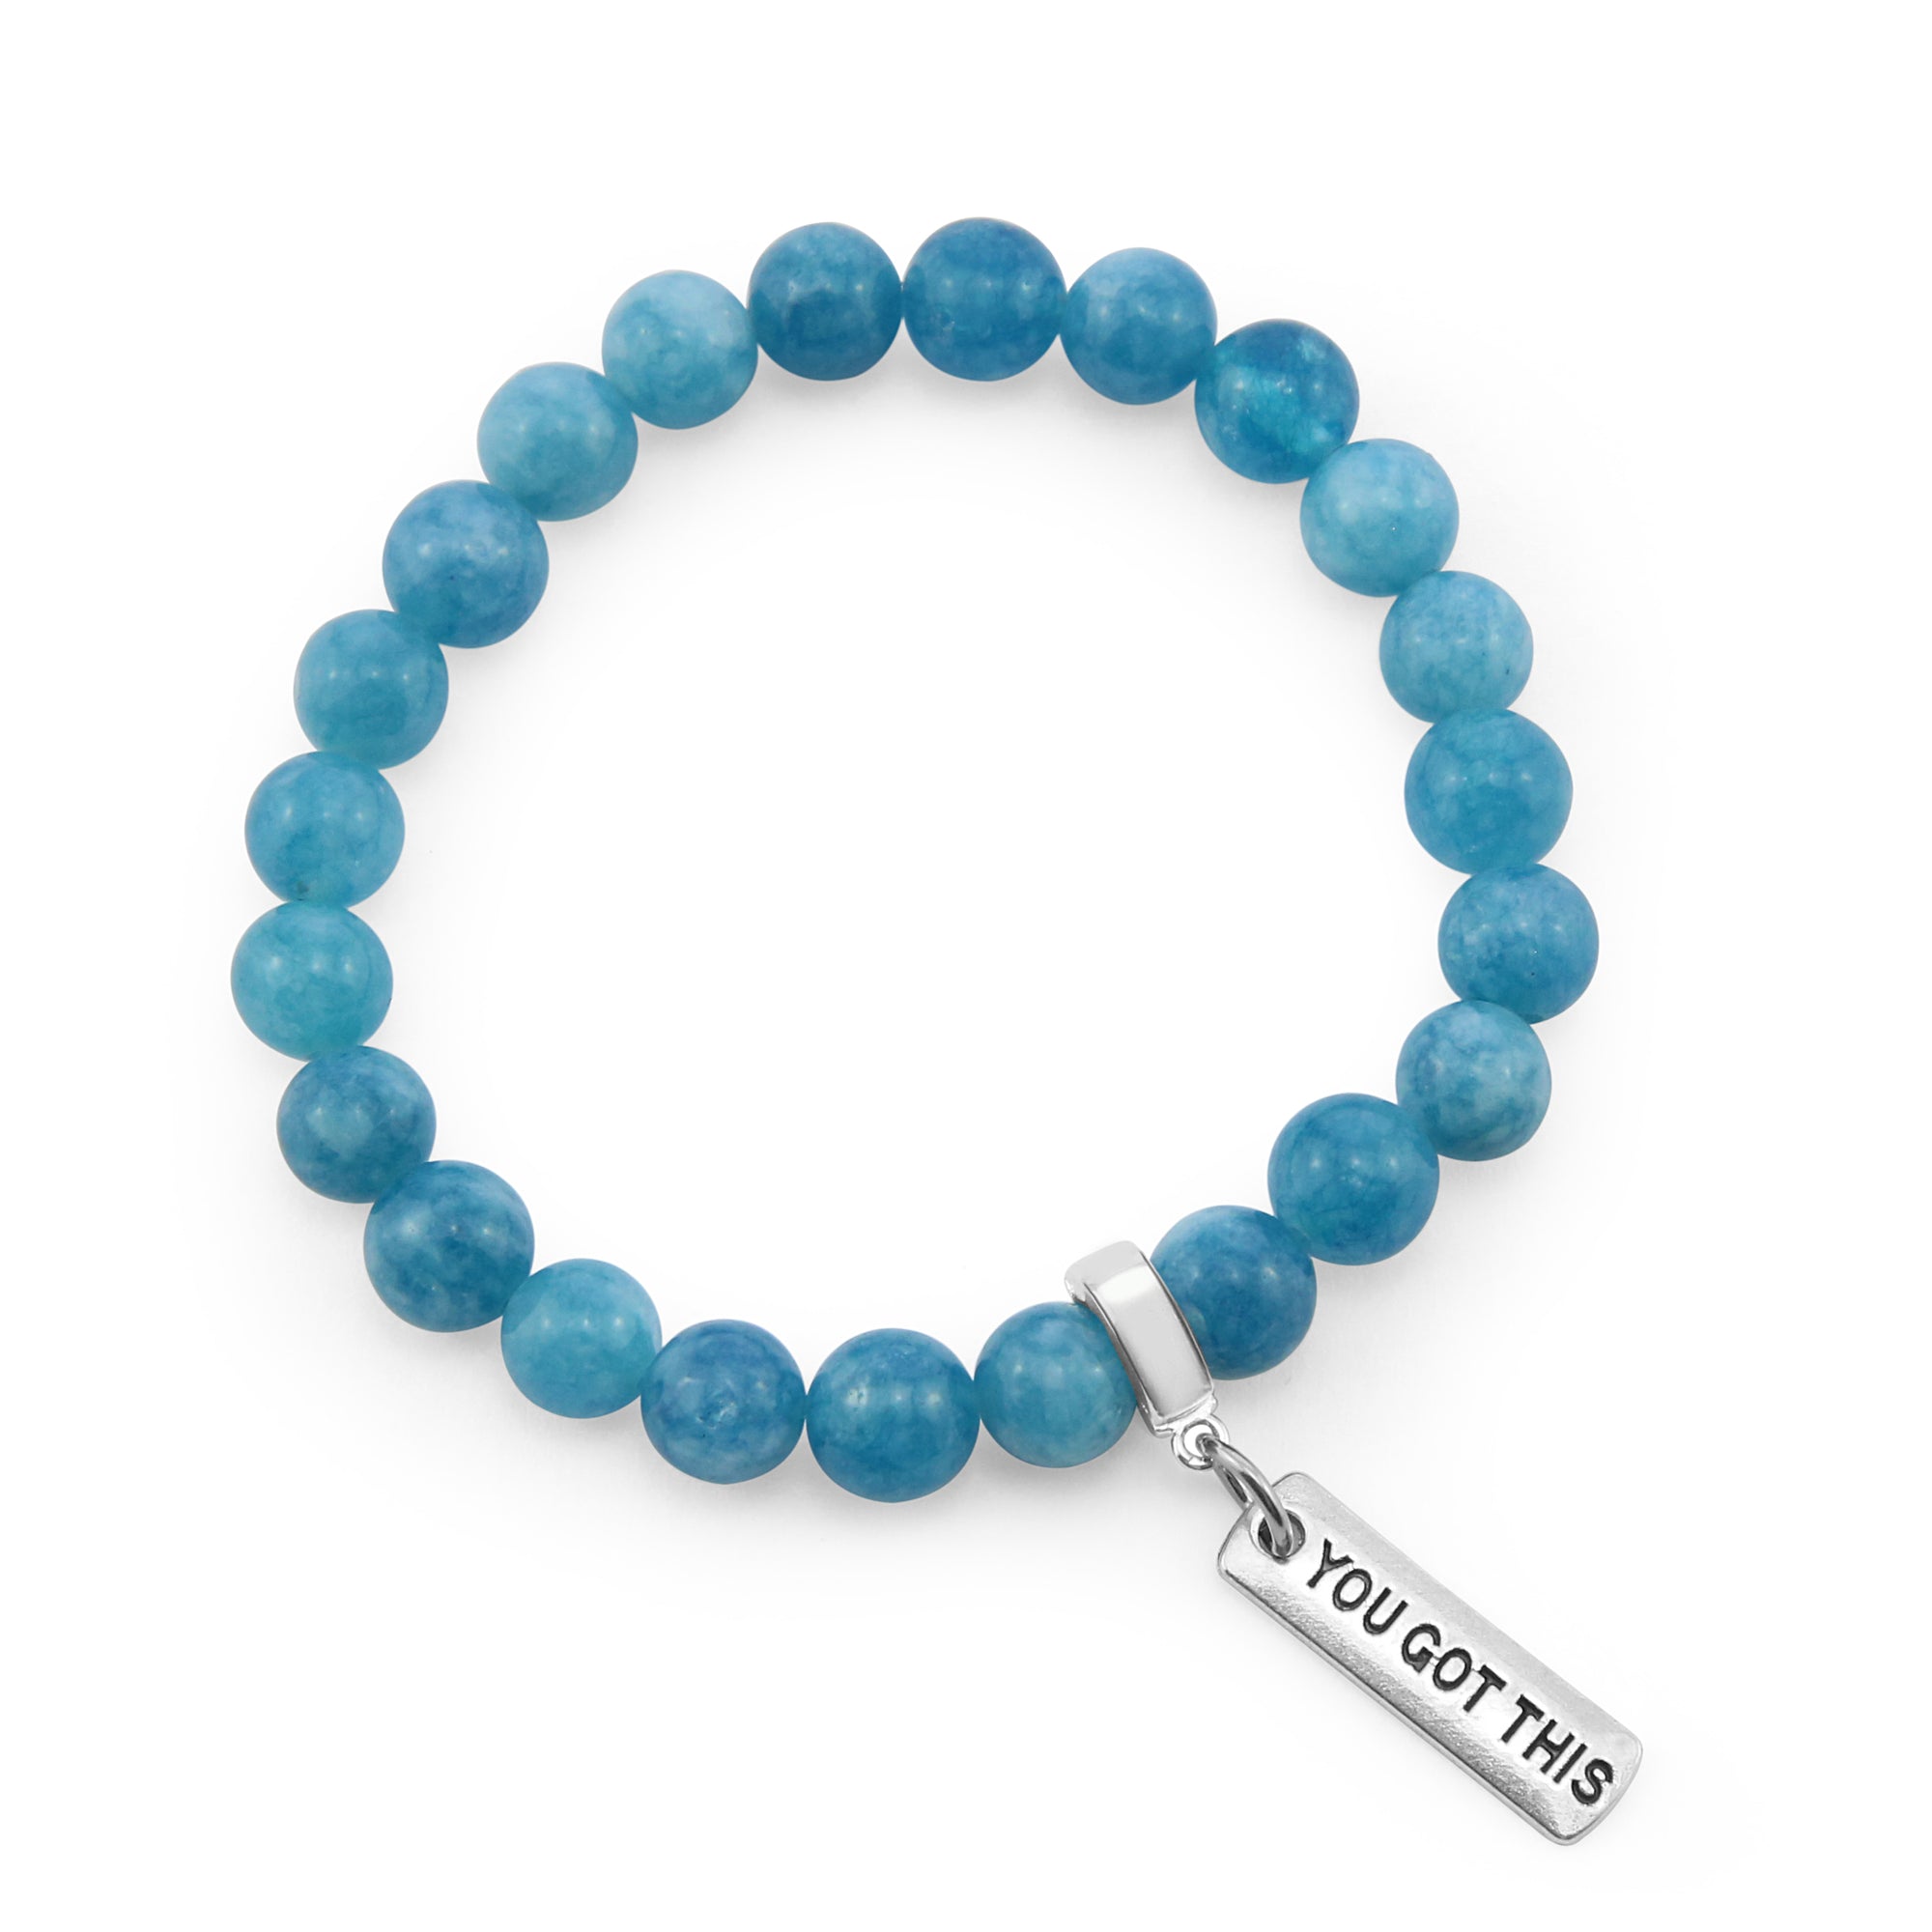 Stone Bracelet - Oceana Wash 8mm Beads - with Silver Word Charm